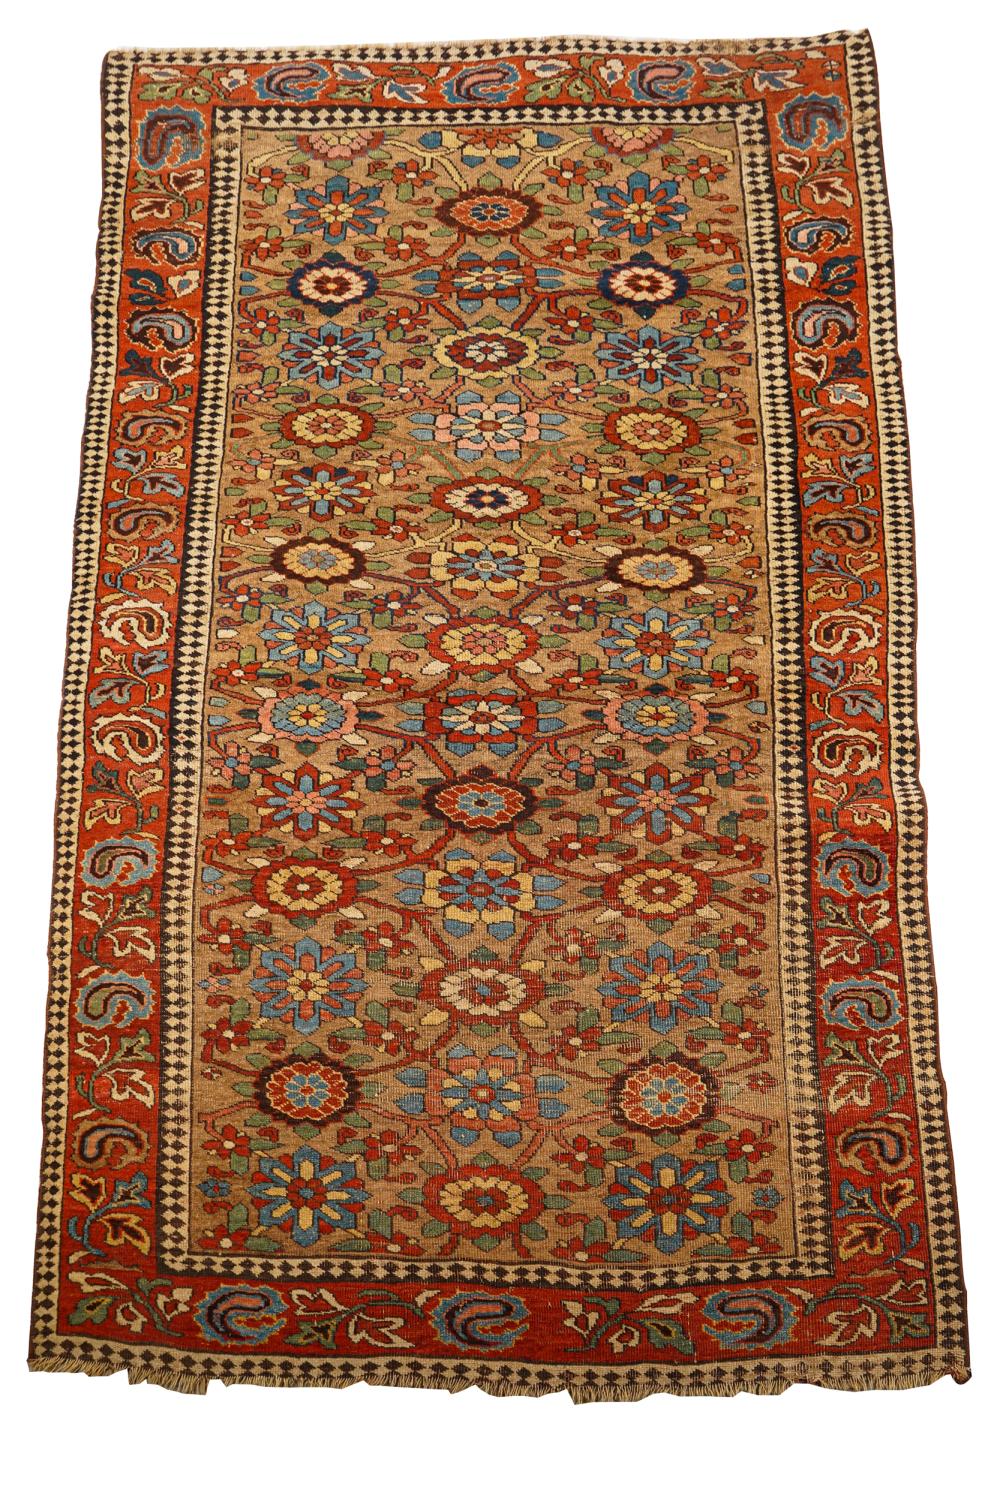 PERSIAN FLORAL THROW RUGCondition: